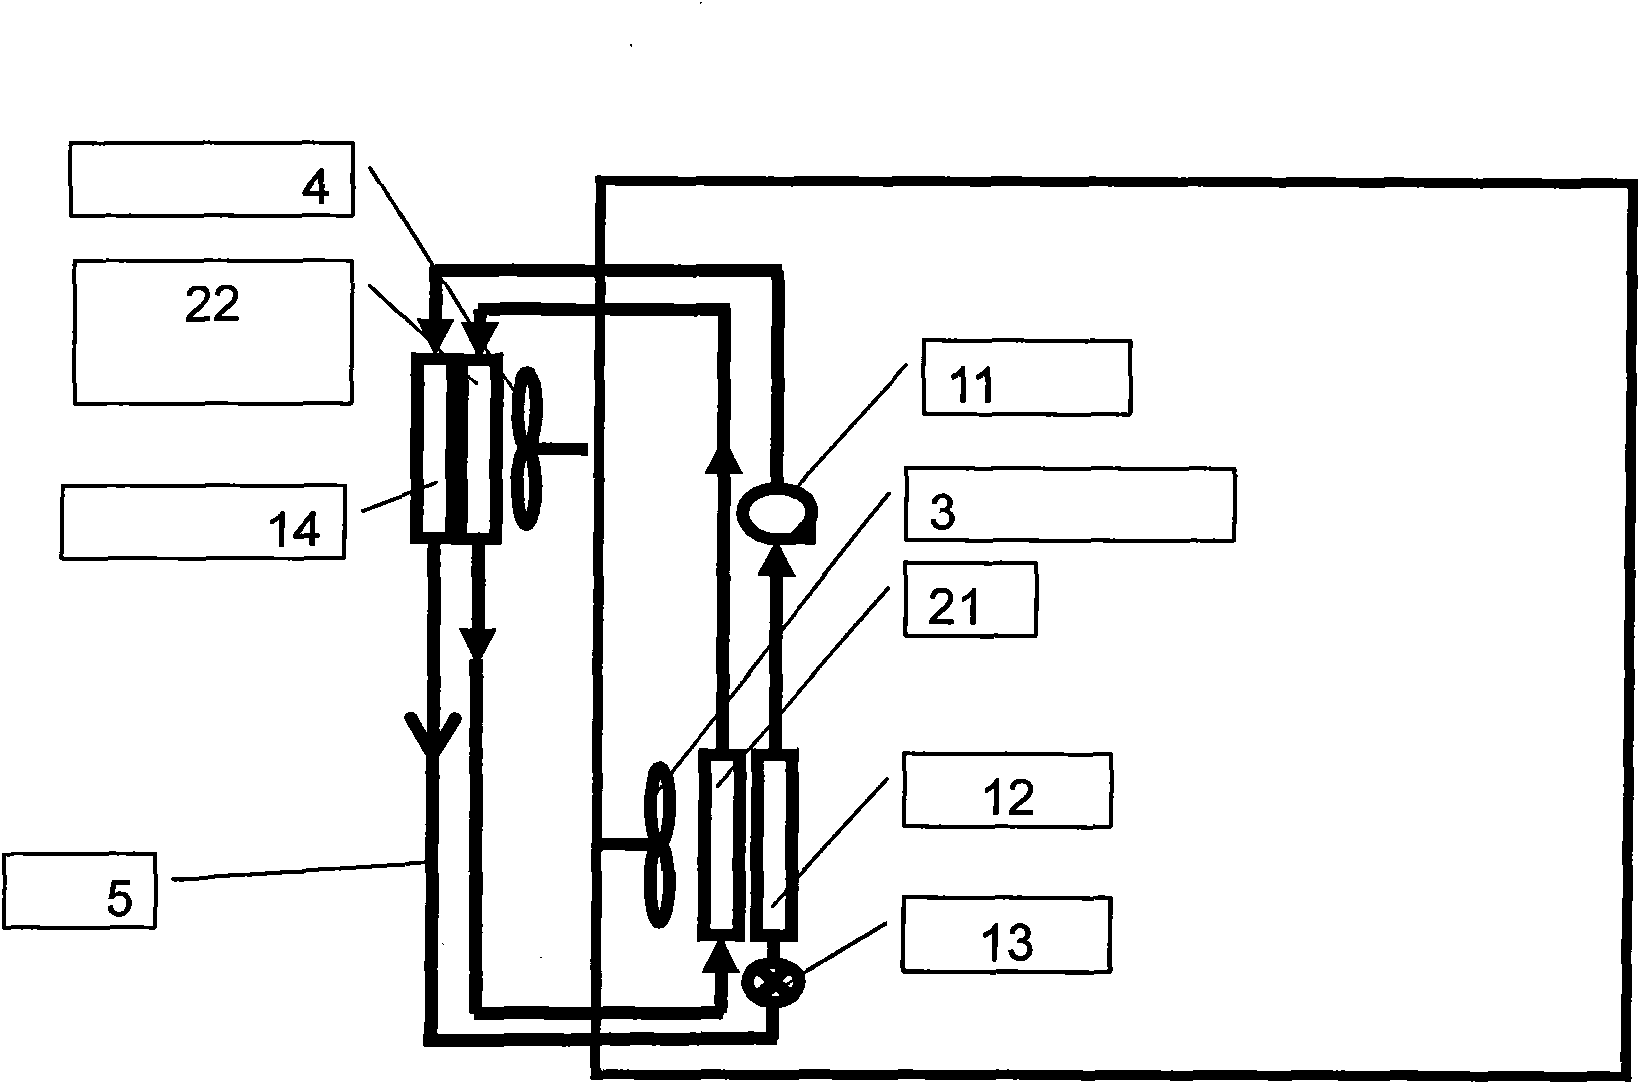 Double-cold source integrated air-conditioning system